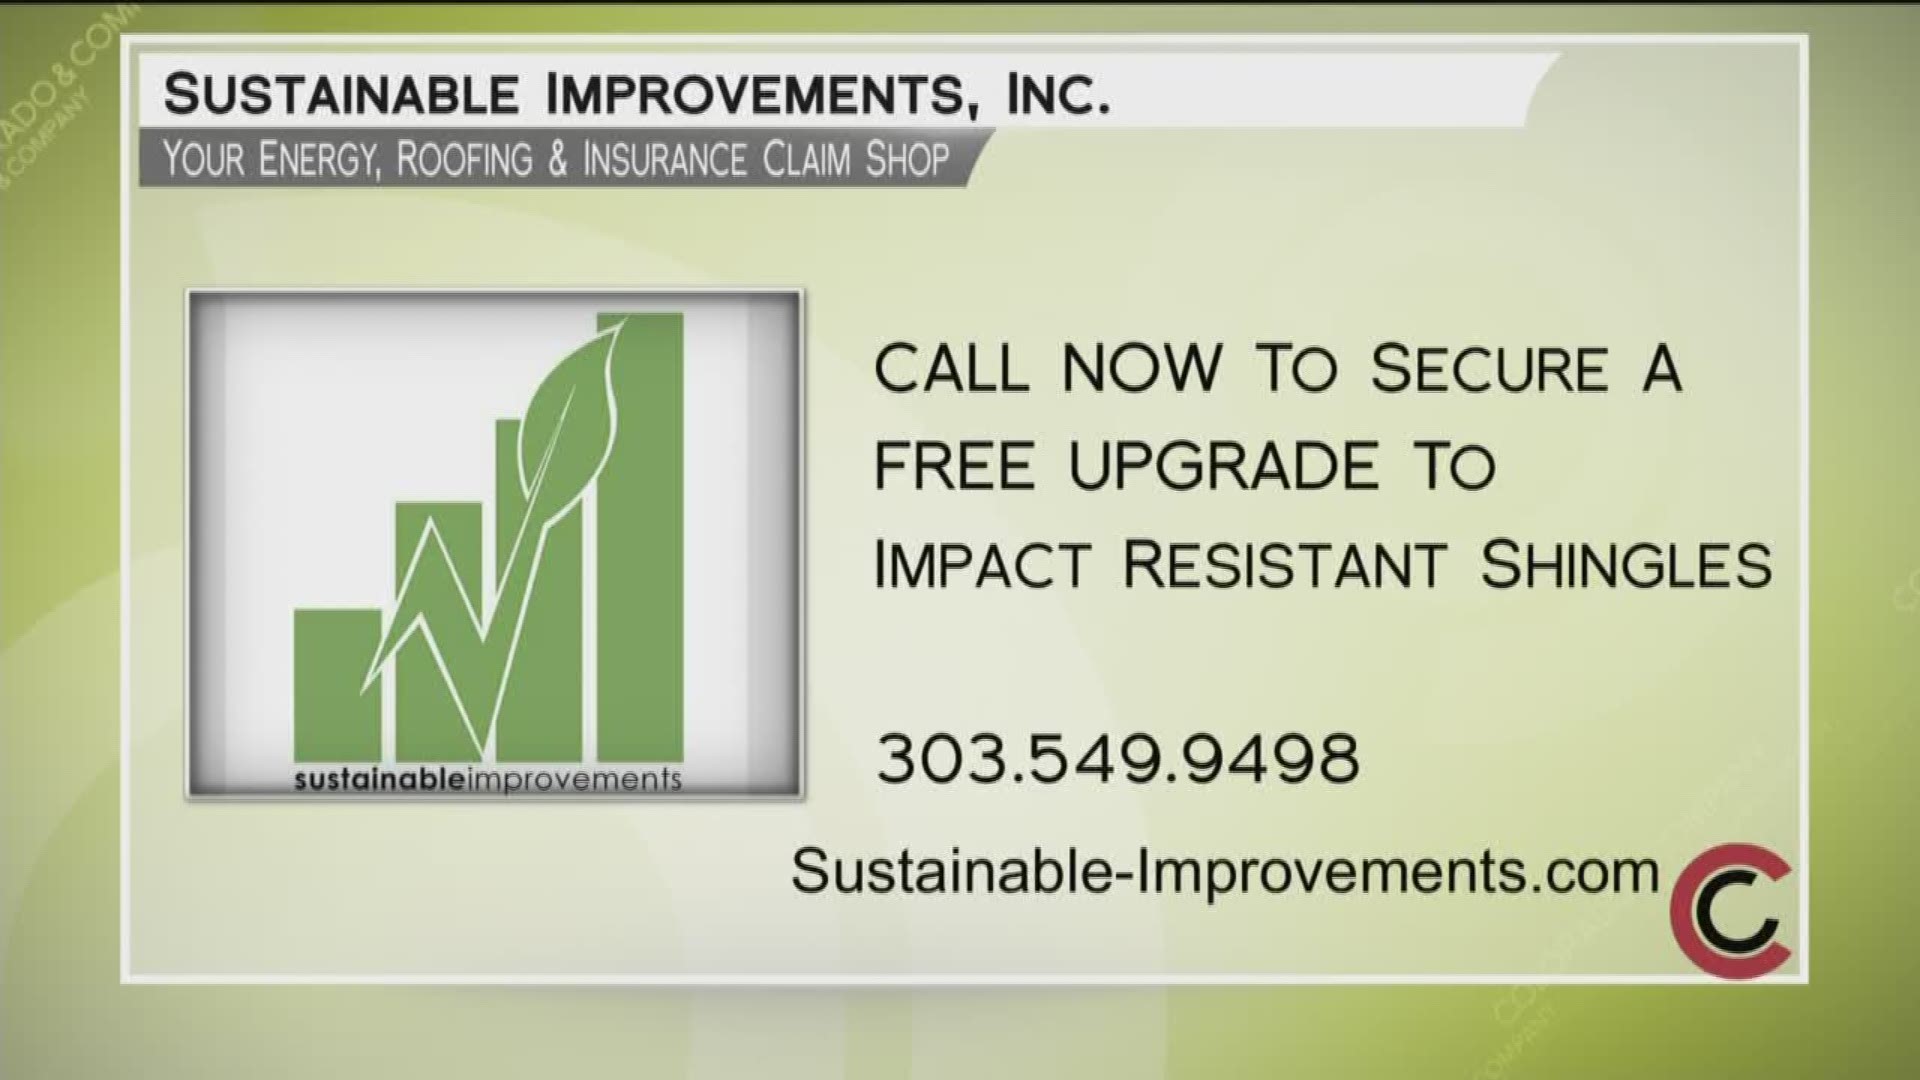 Call at Sustainable Improvements to secure a free upgrade to impact resistant shingles. Call 303.549.9498 or visit Sustainable-Improvements.com to get started.